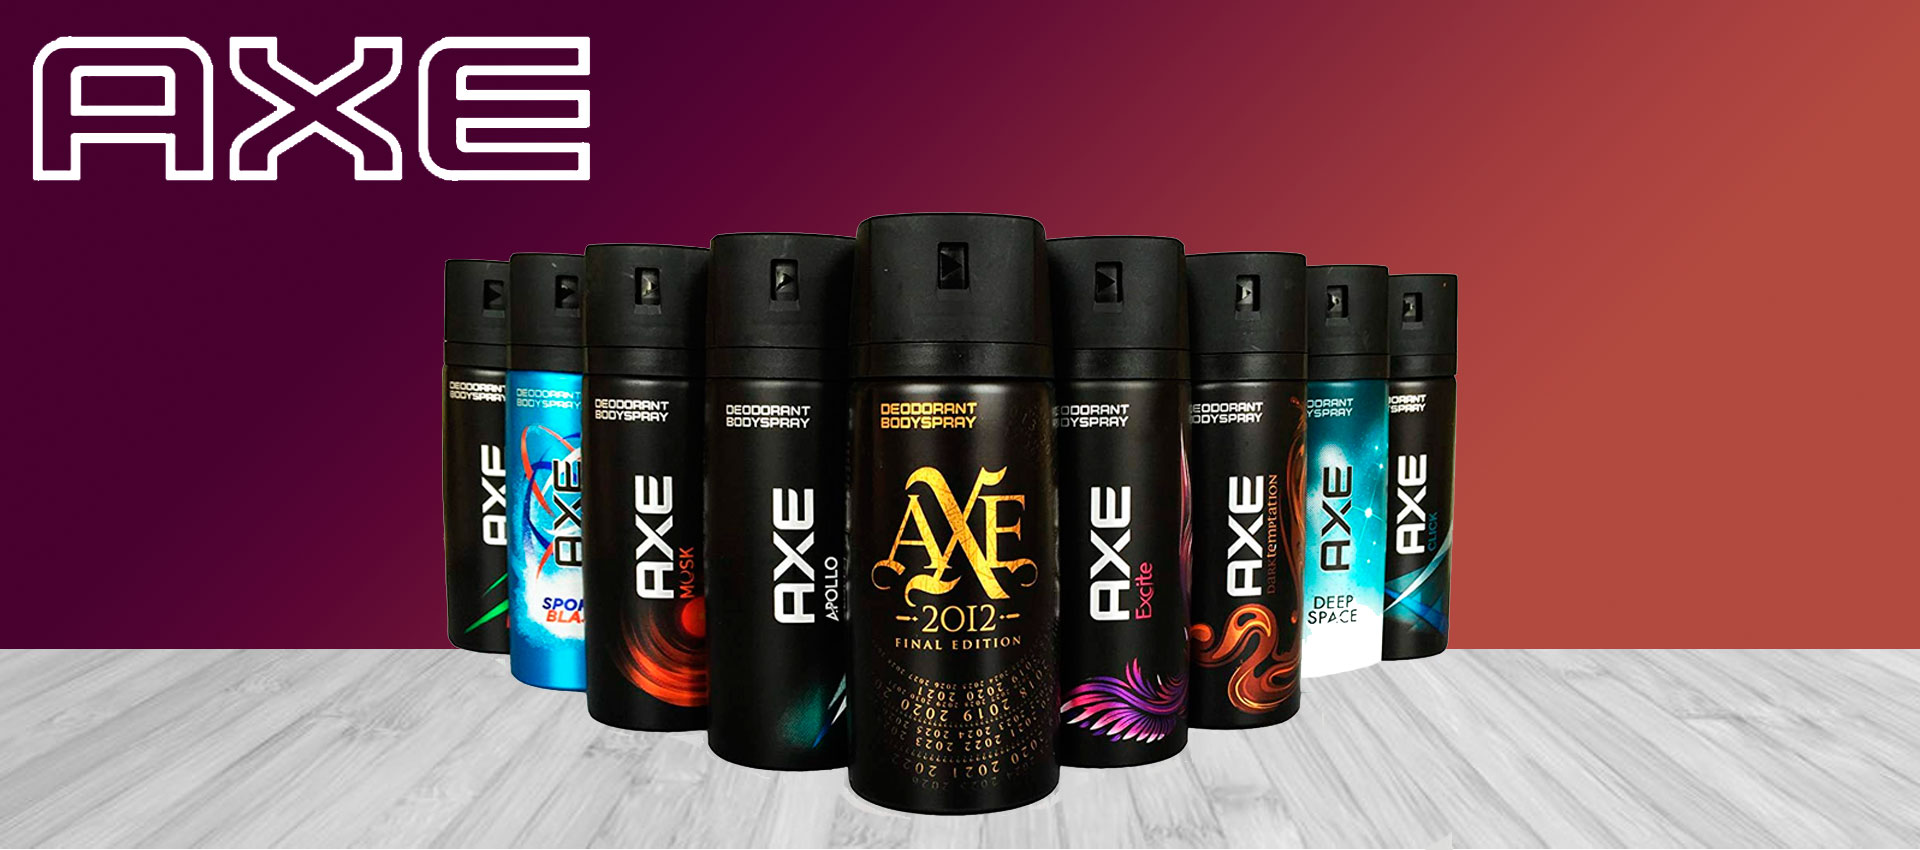 Axe in Pakistan - Move your game up by smelling fresh!